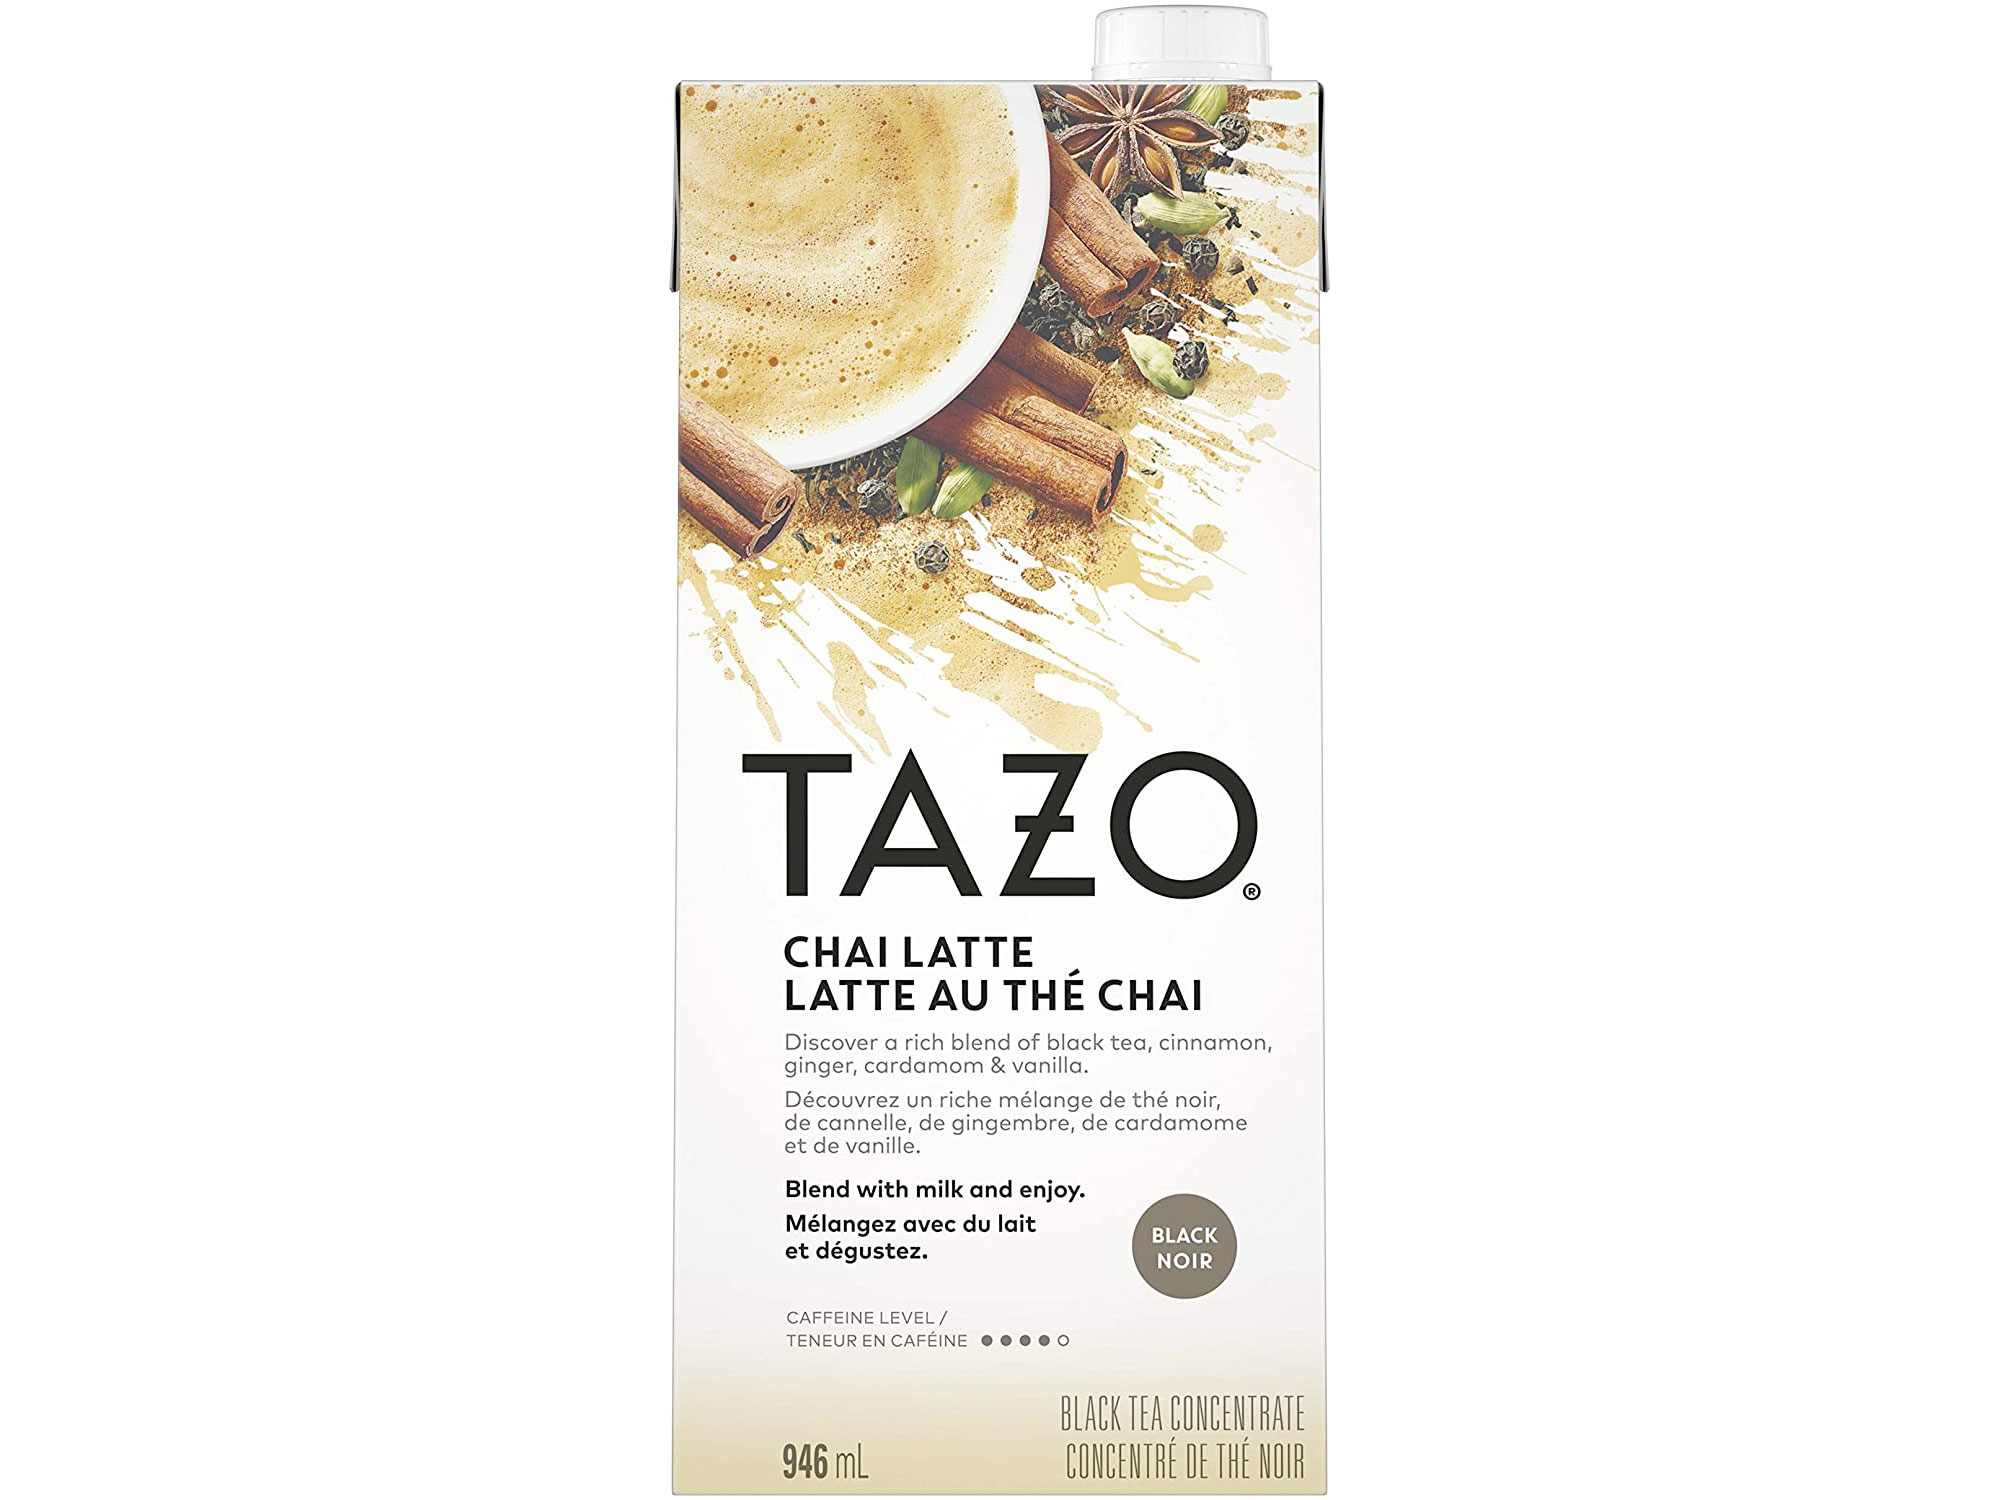 Amazon：Tazo Concentrated Chai Latte for a flavorful Blend of Black Tea , Cinnamon, Ginger, Cardamom and Vanilla(946ml)只賣$3.98